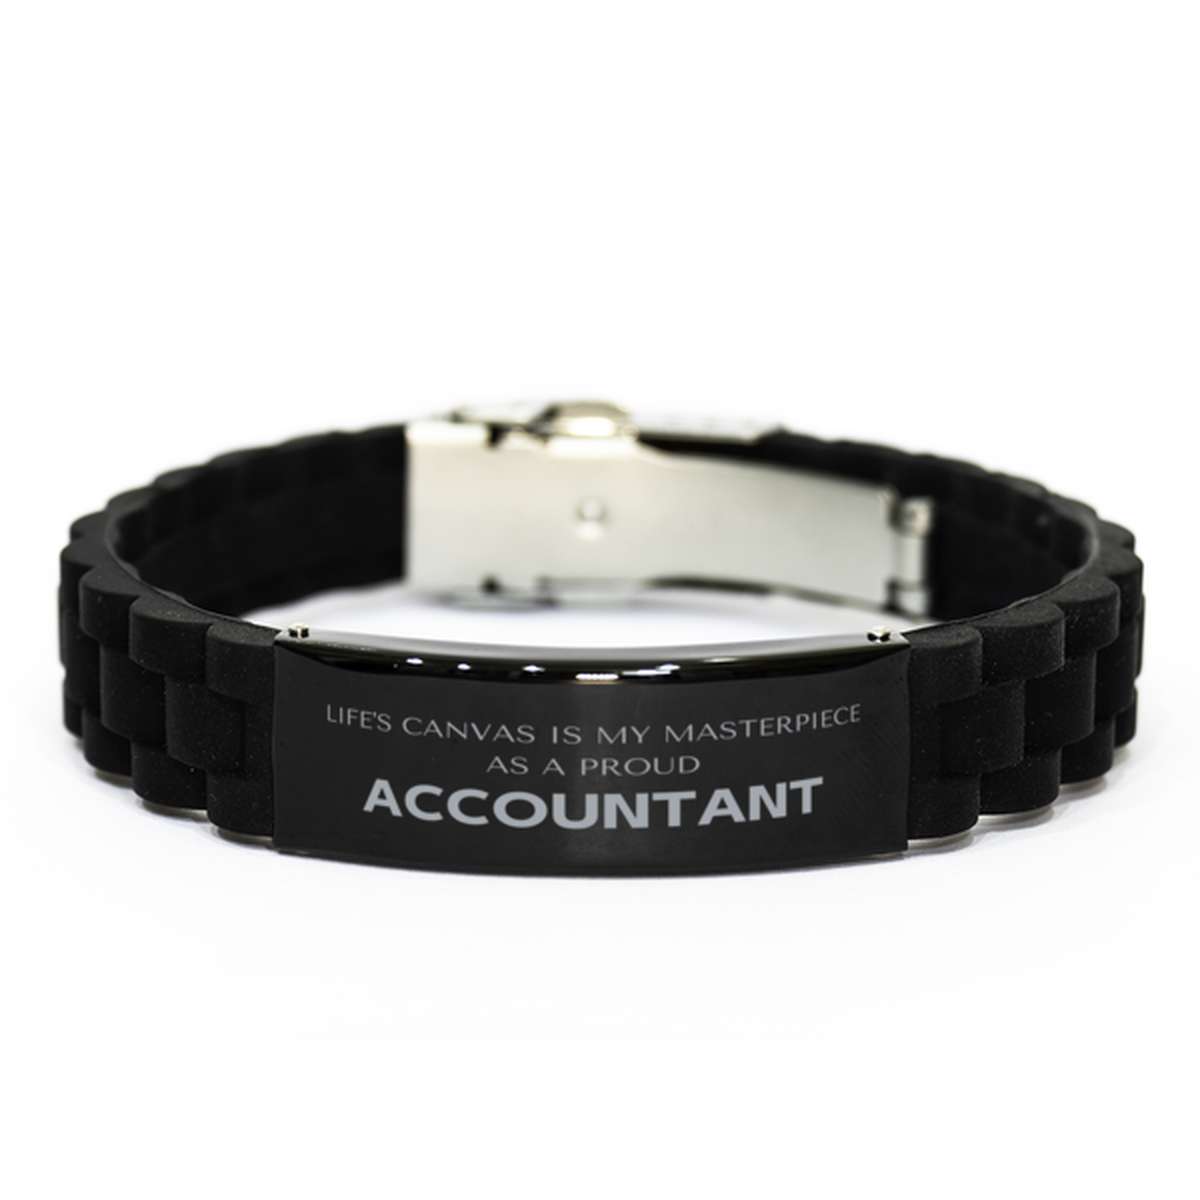 Proud Accountant Gifts, Life's canvas is my masterpiece, Epic Birthday Christmas Unique Black Glidelock Clasp Bracelet For Accountant, Coworkers, Men, Women, Friends